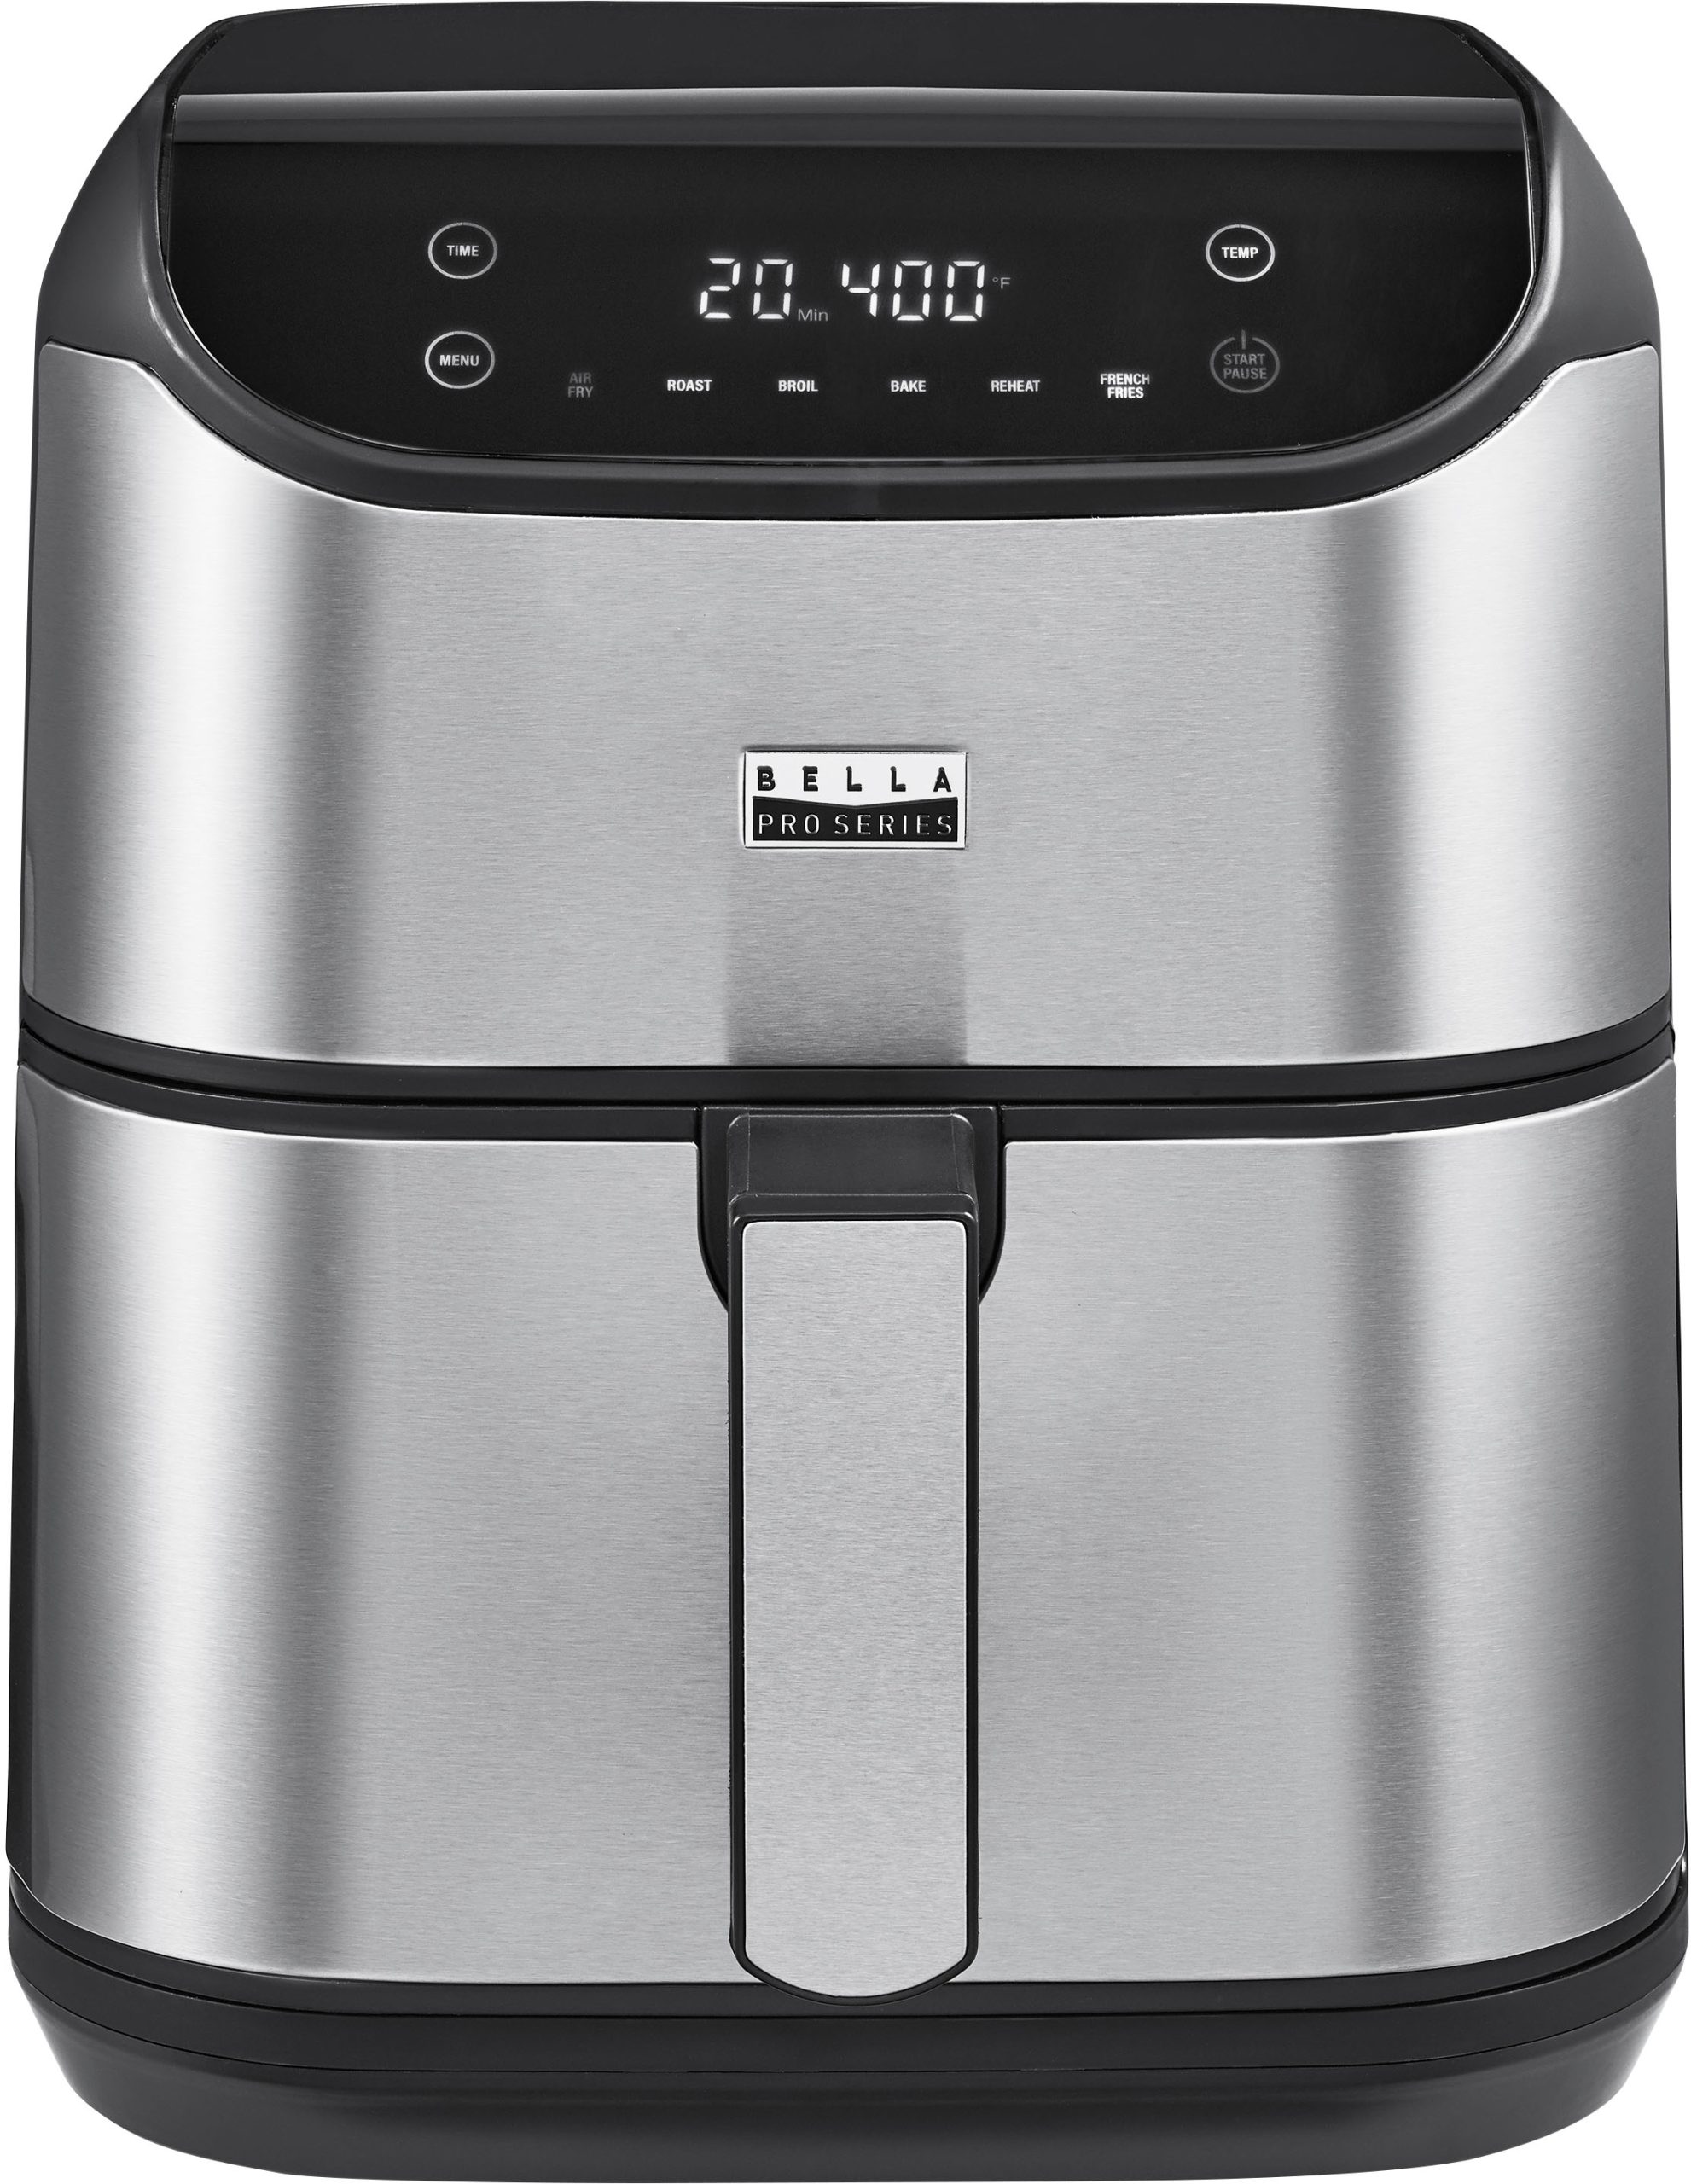 Bella Pro Series – 6-qt. Digital Air Fryer with Stainless Finish – Stainless Steel – Just $54.99 at Best Buy